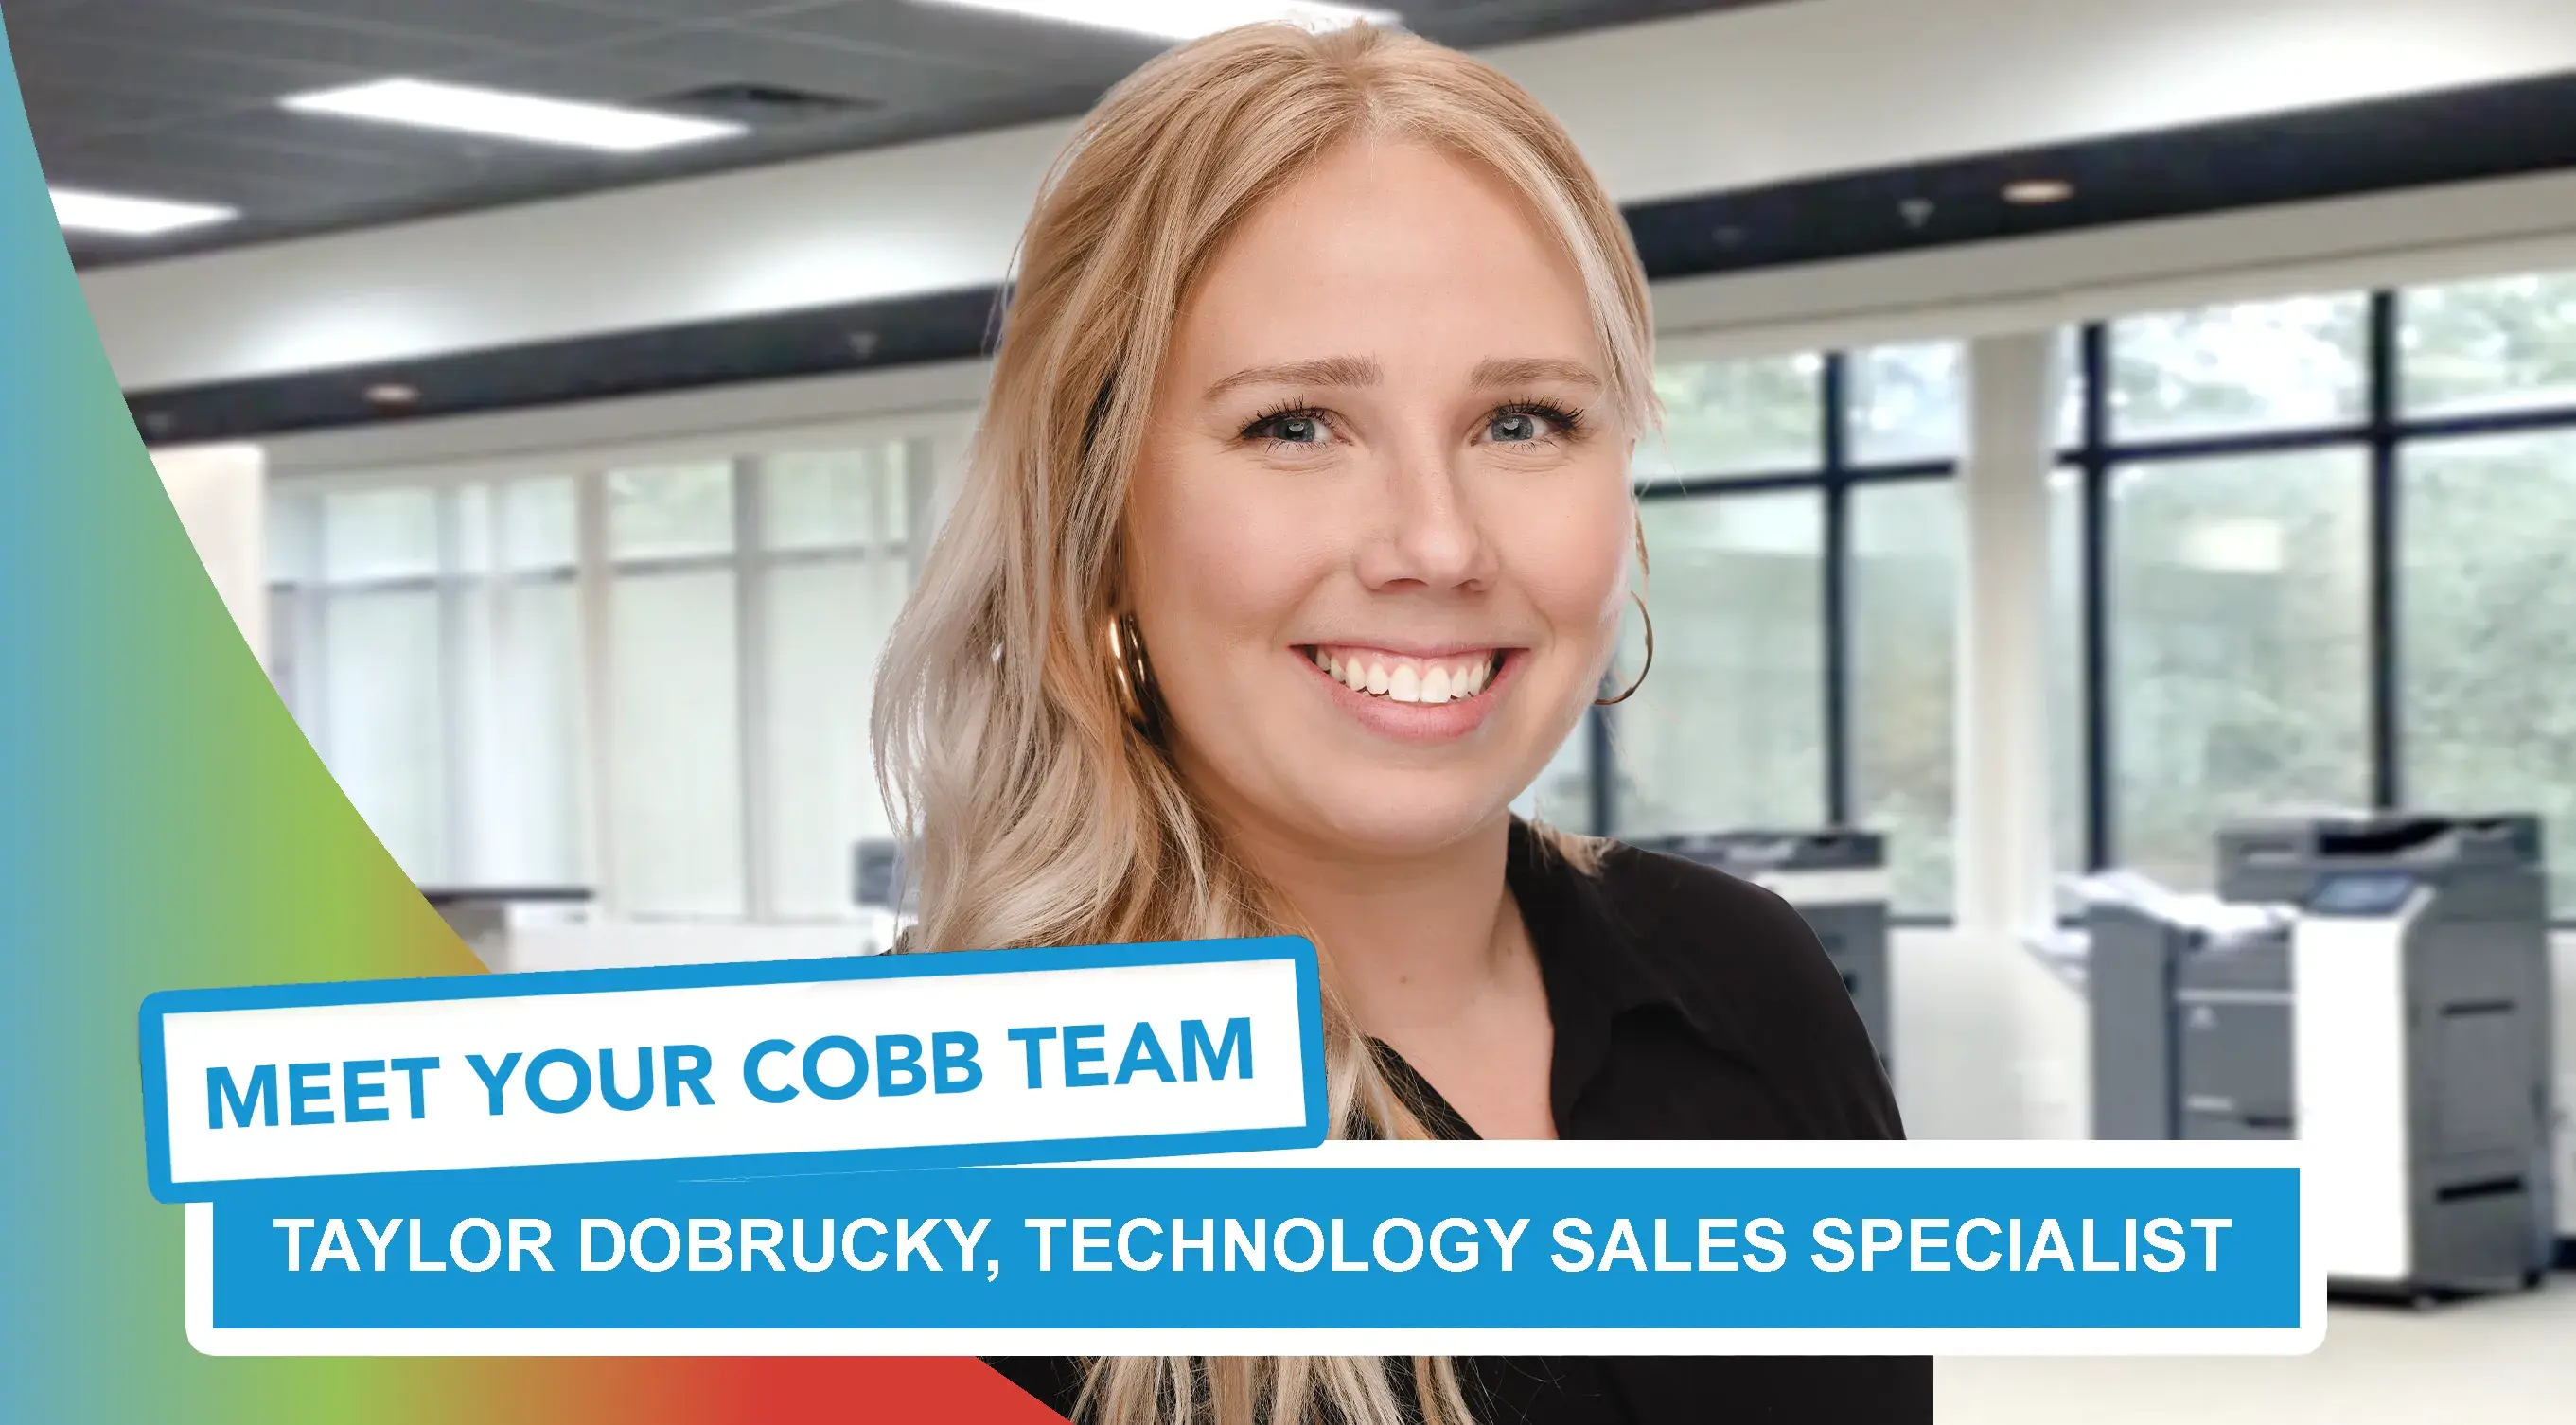 Meet Your Cobb Team: Taylor Dobrucky, Technology Sales Specialist